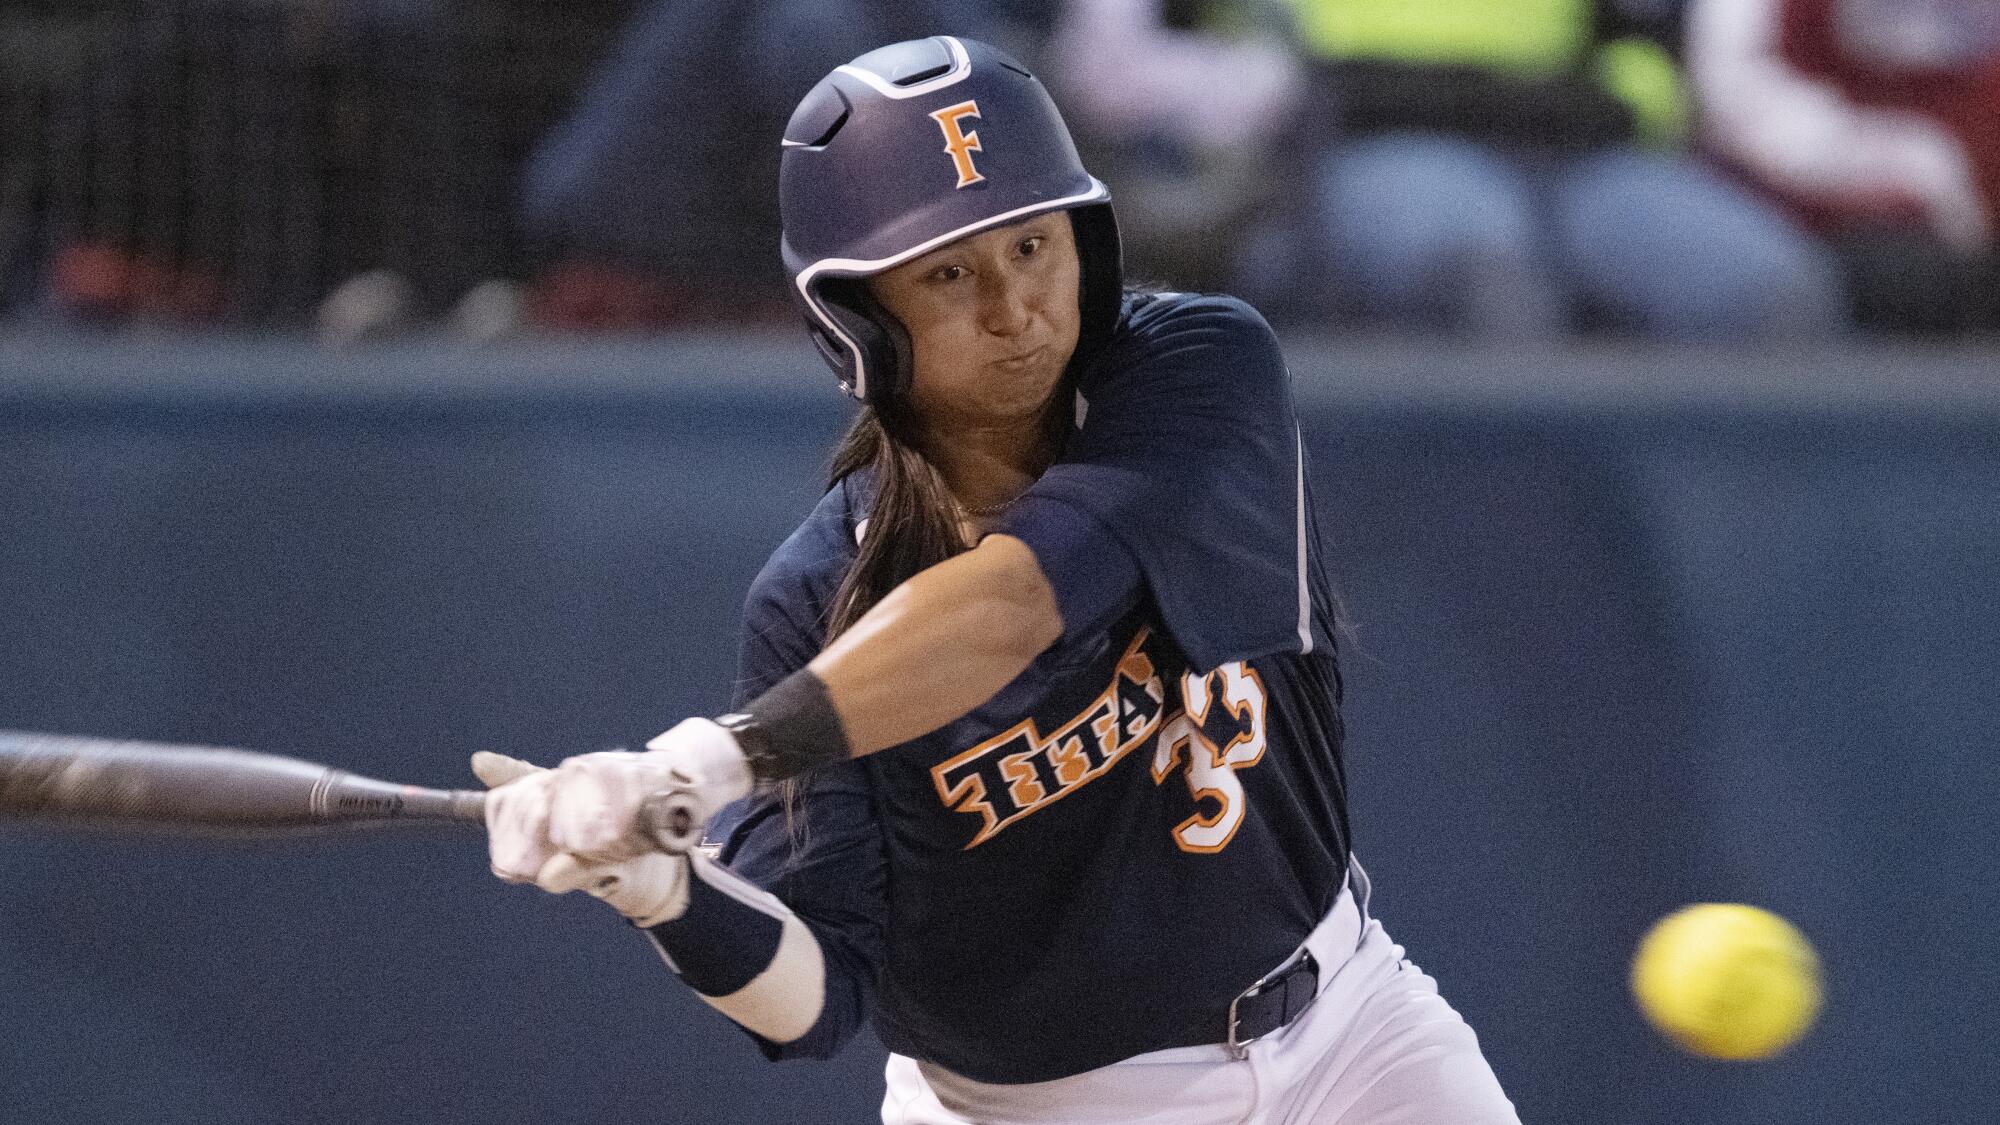 Does Women's Baseball Have a Future in the U.S.?